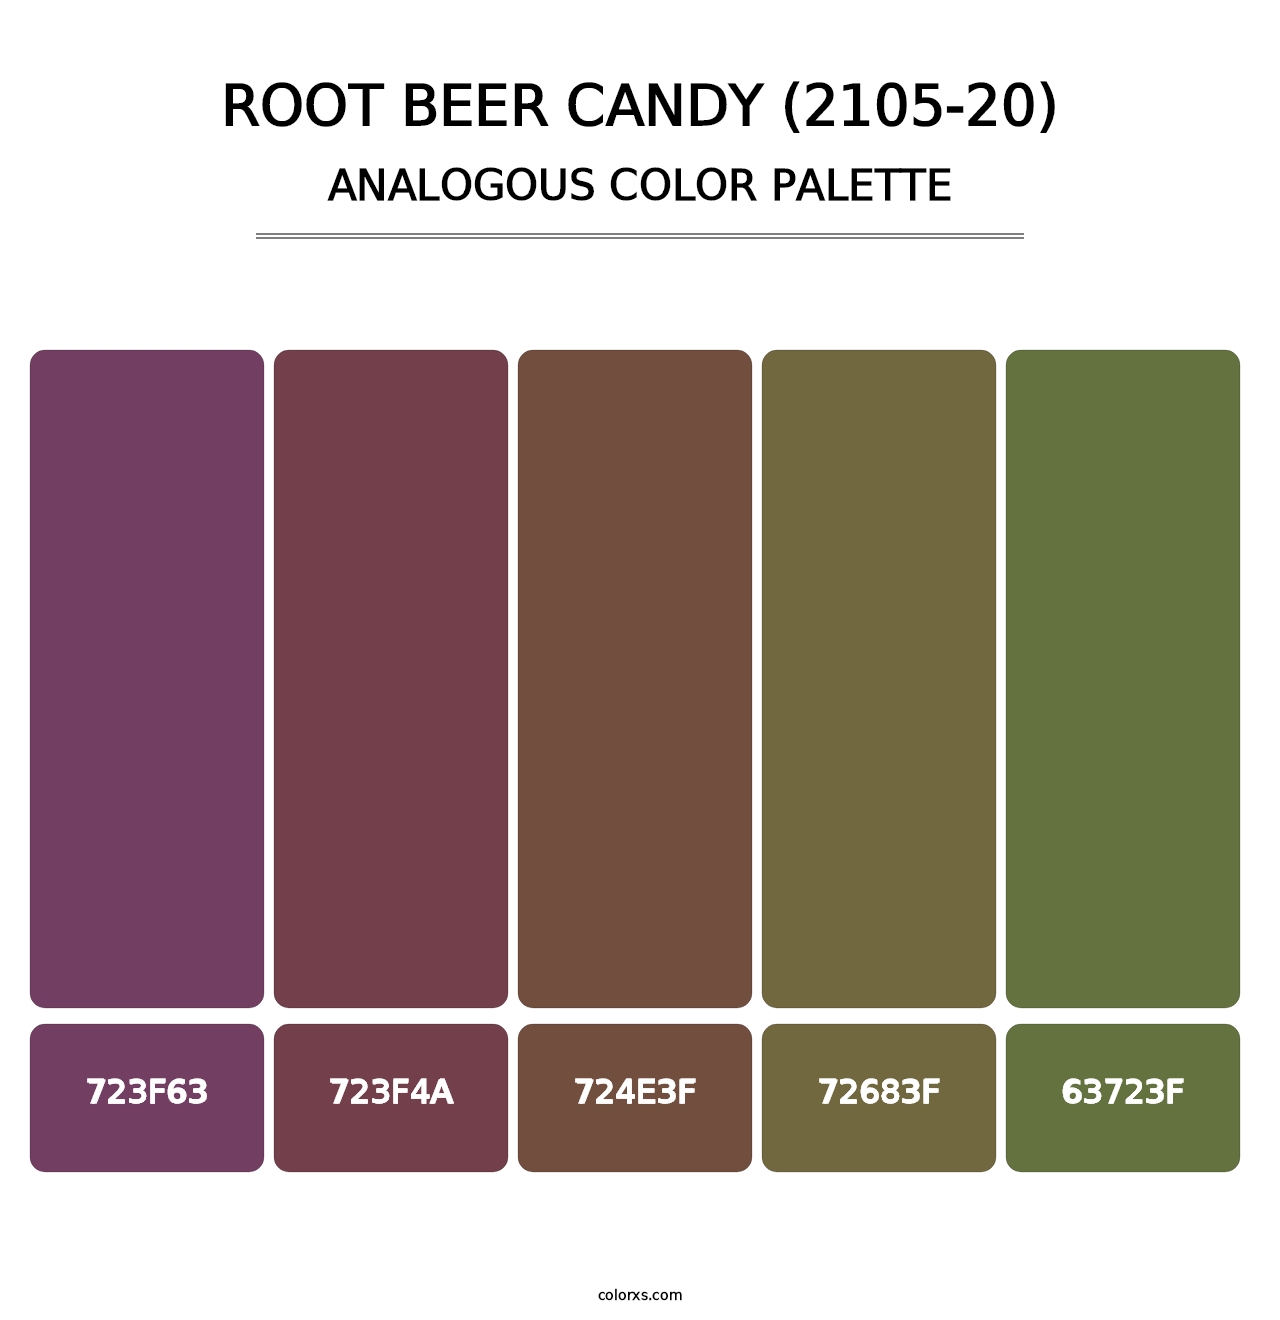 Root Beer Candy (2105-20) - Analogous Color Palette